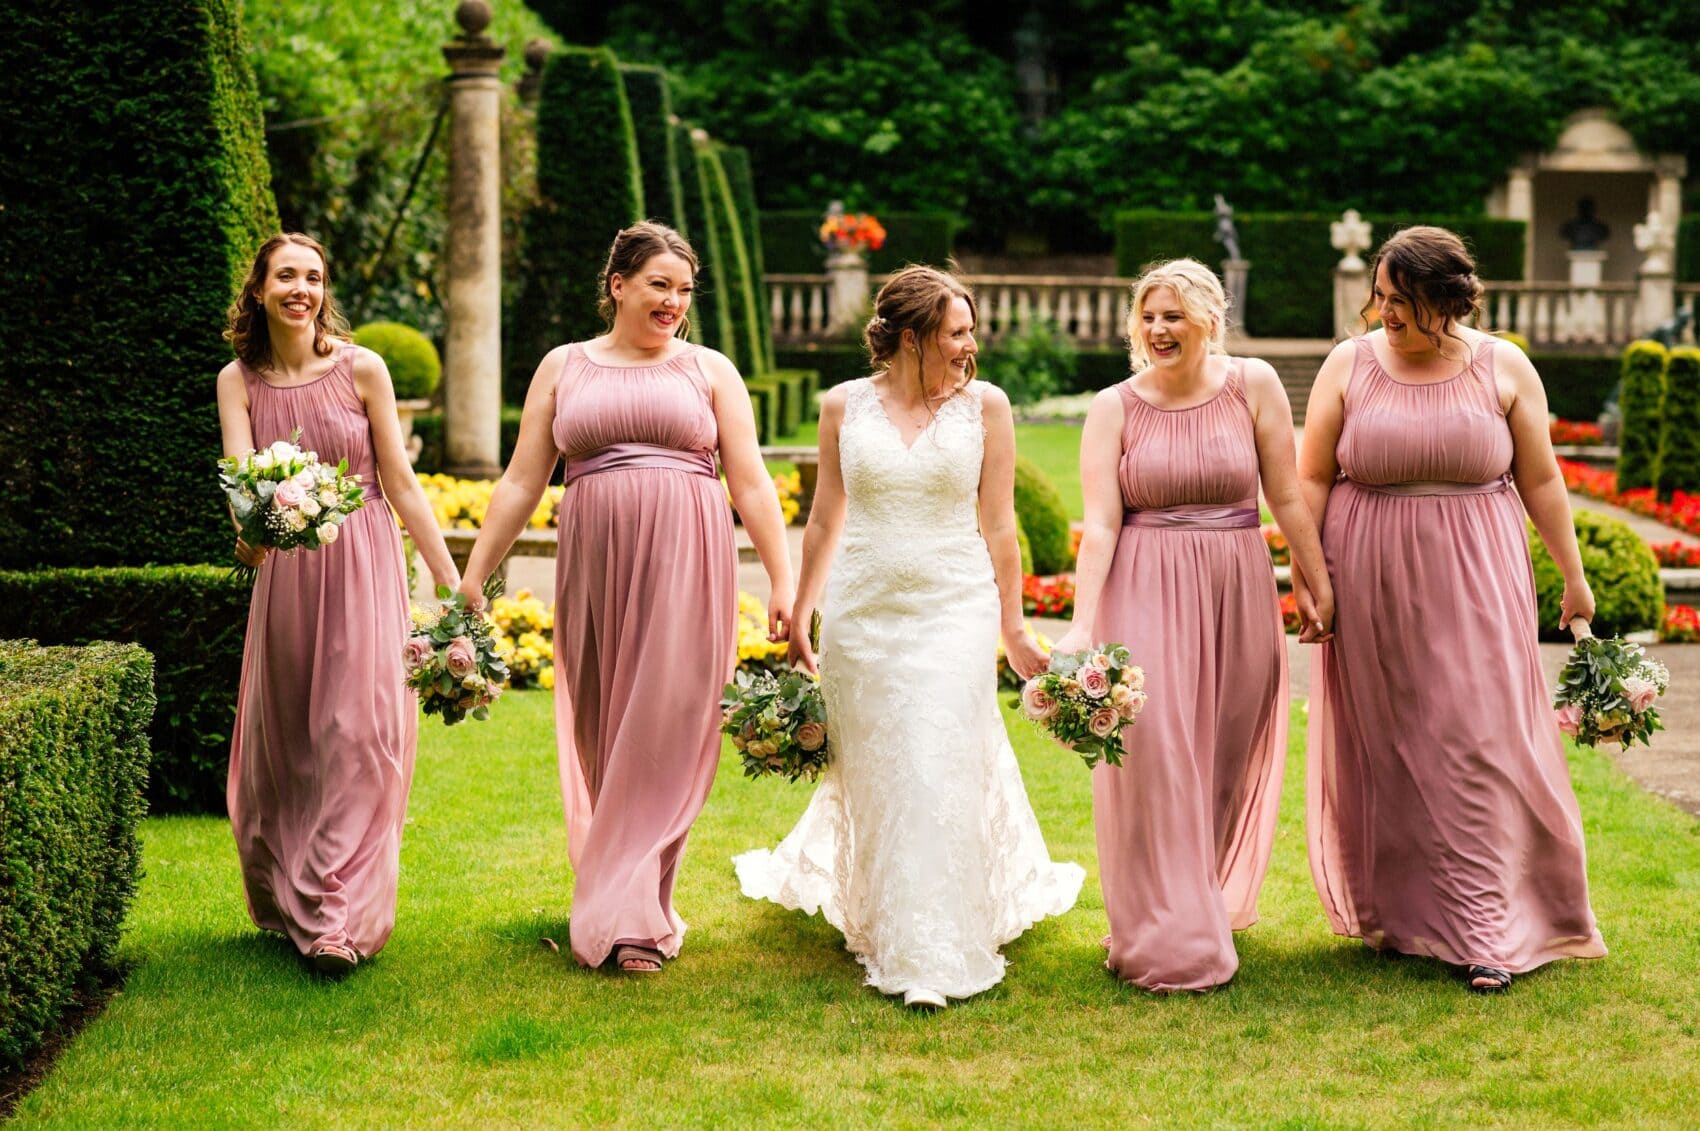 Bride walks with bridesmaids in Blush Pink dresses